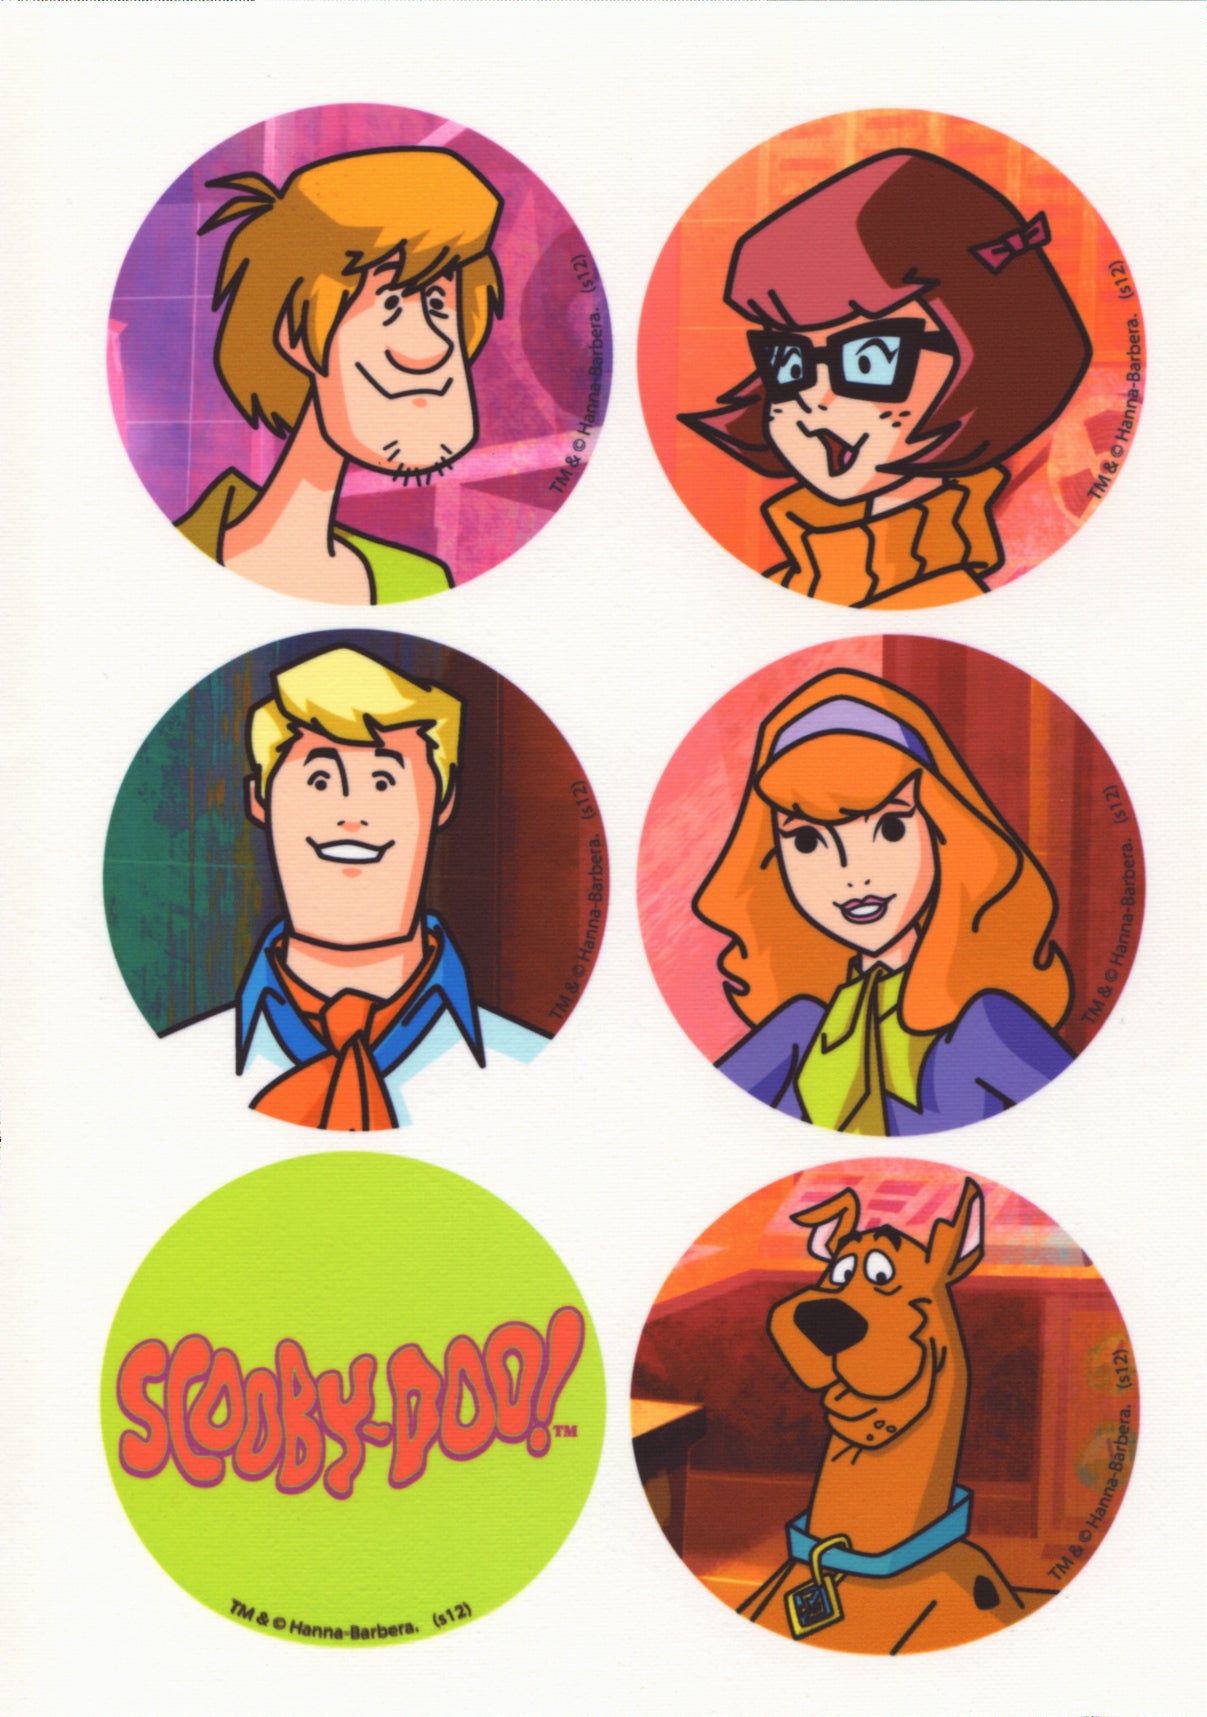 Scooby-Doo Logo Shaggy Velma Fred and Daphne Edible Cupcake Topper Images ABPID03681